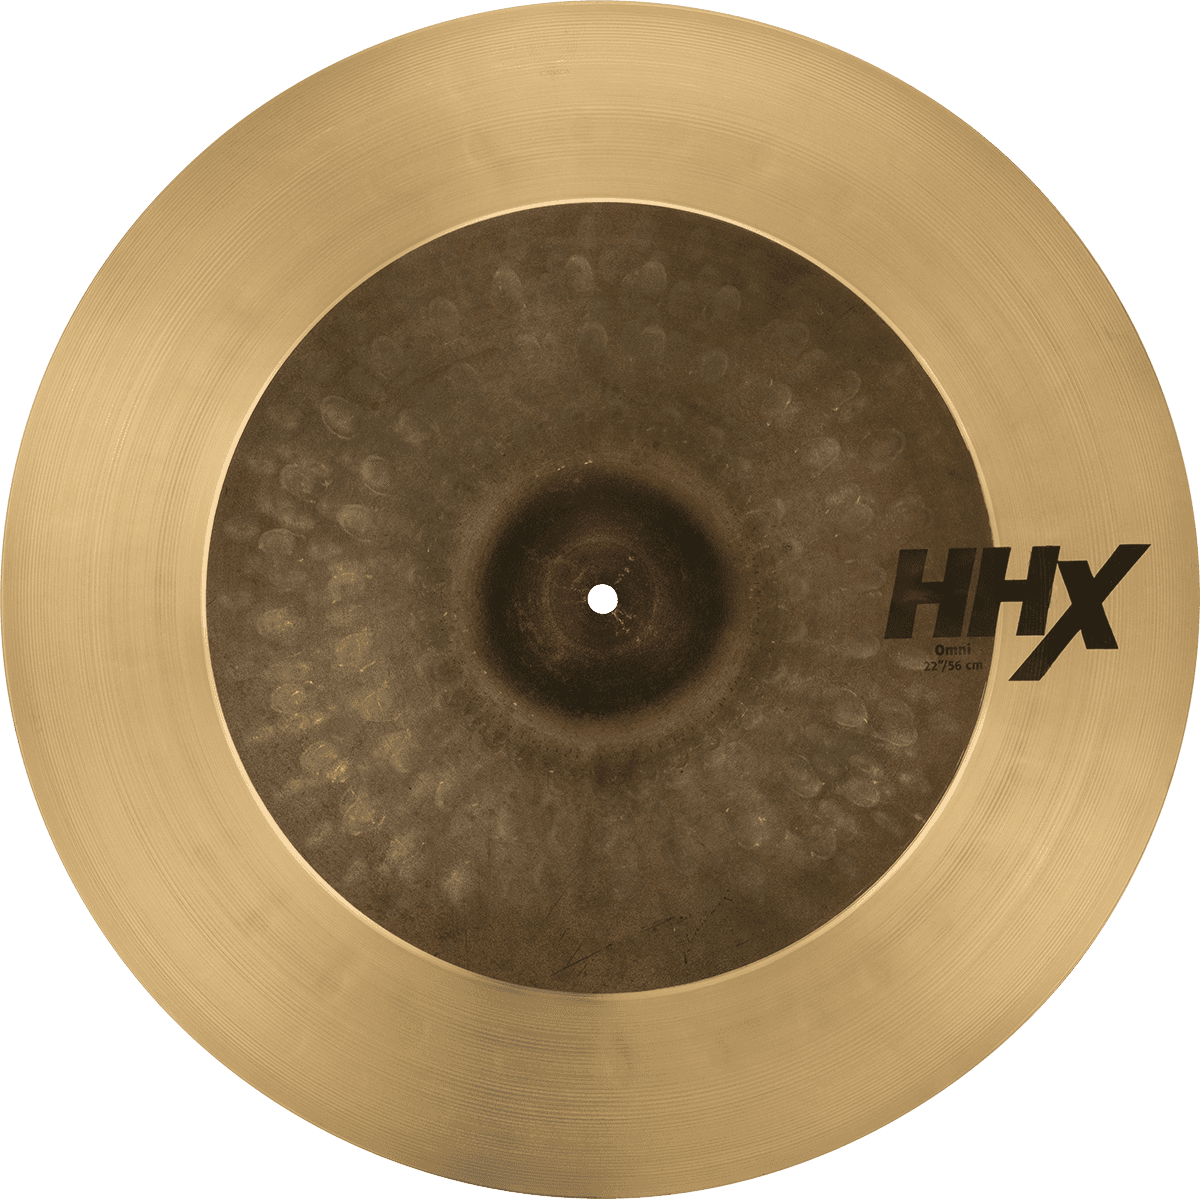 Sabian Hhx Omni Ride - 22 Pouces - Ride cymbal - Variation 1